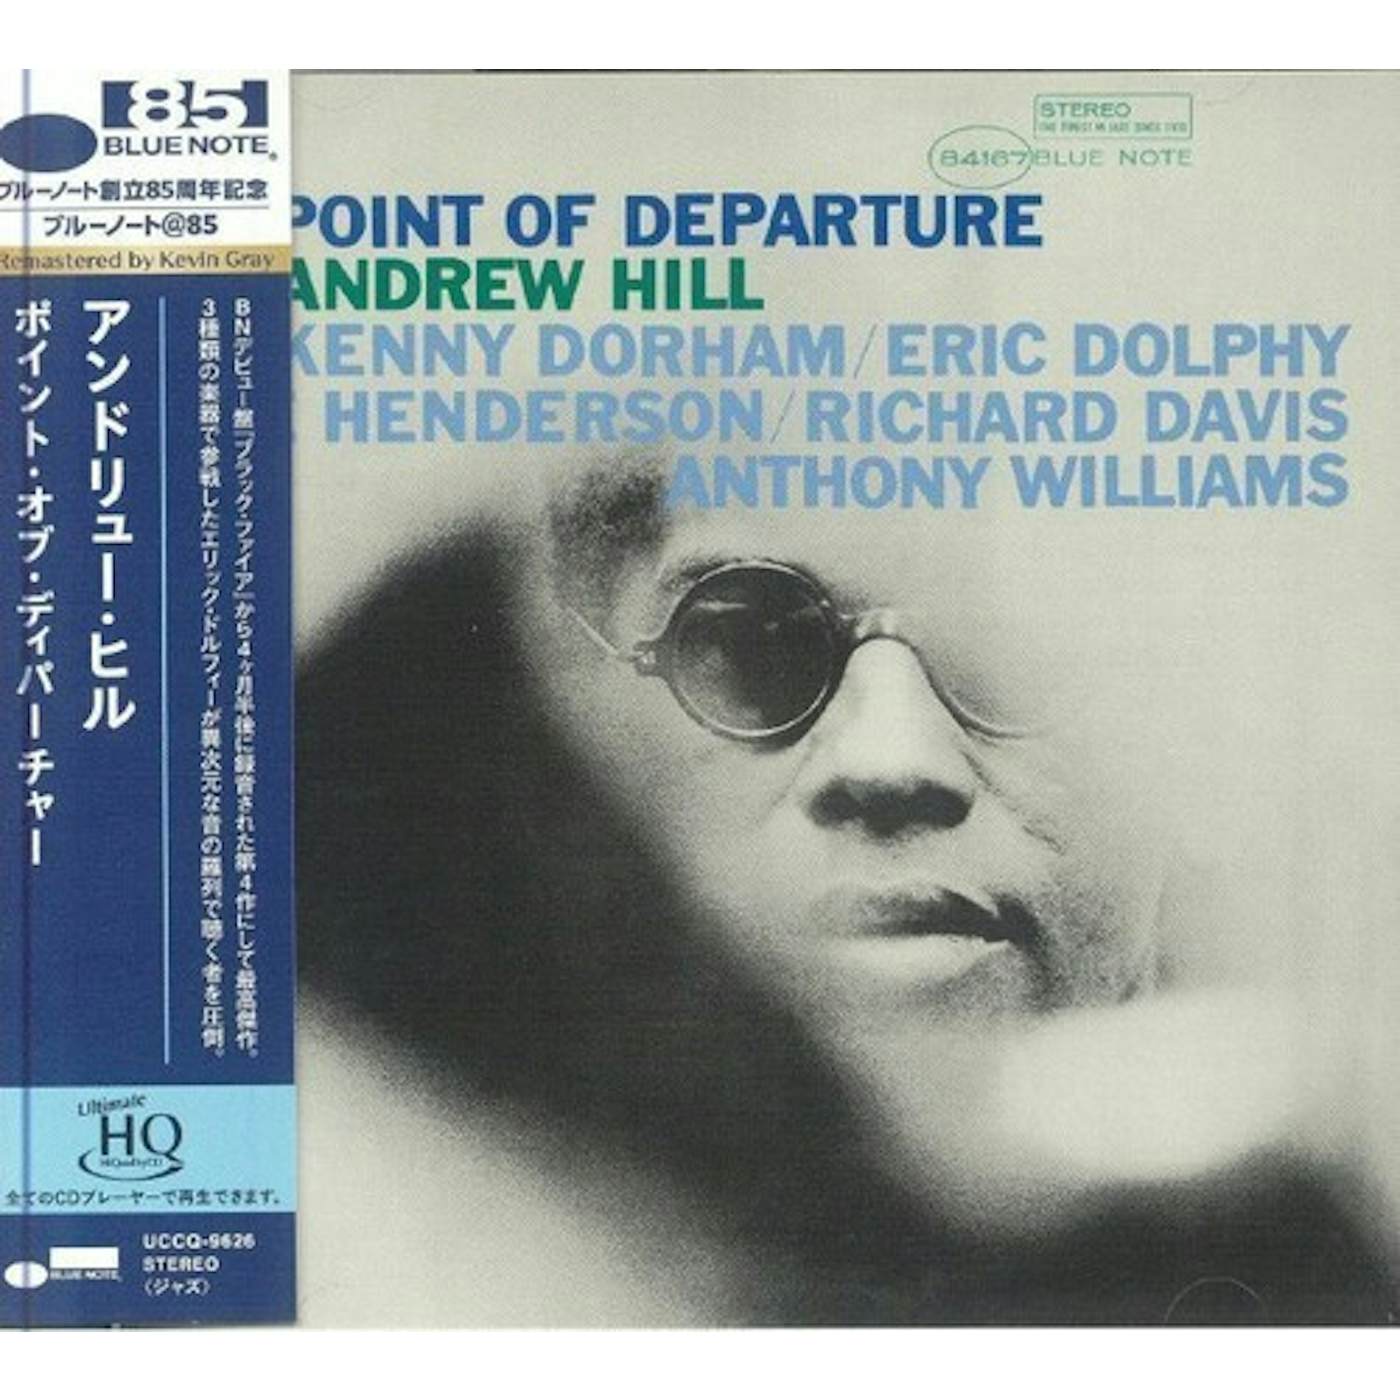 Andrew Hill POINT OF DEPERTURE CD